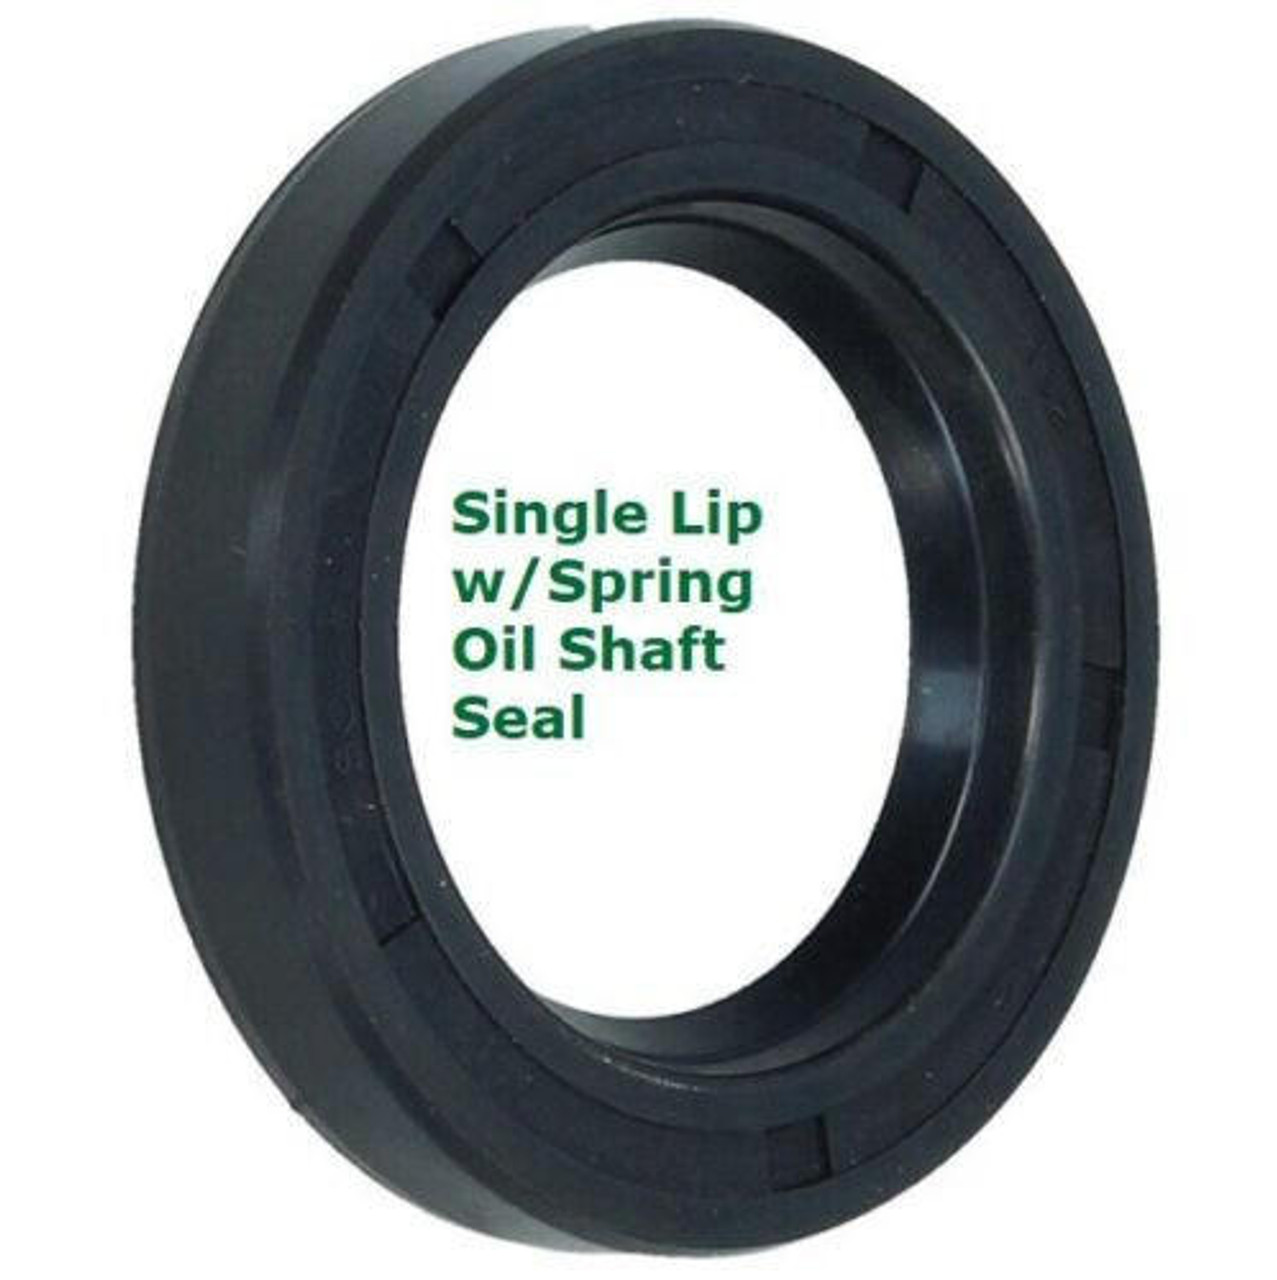 Metric Oil Shaft Seal 70 x 100 x 13mm   Price for 1 pc